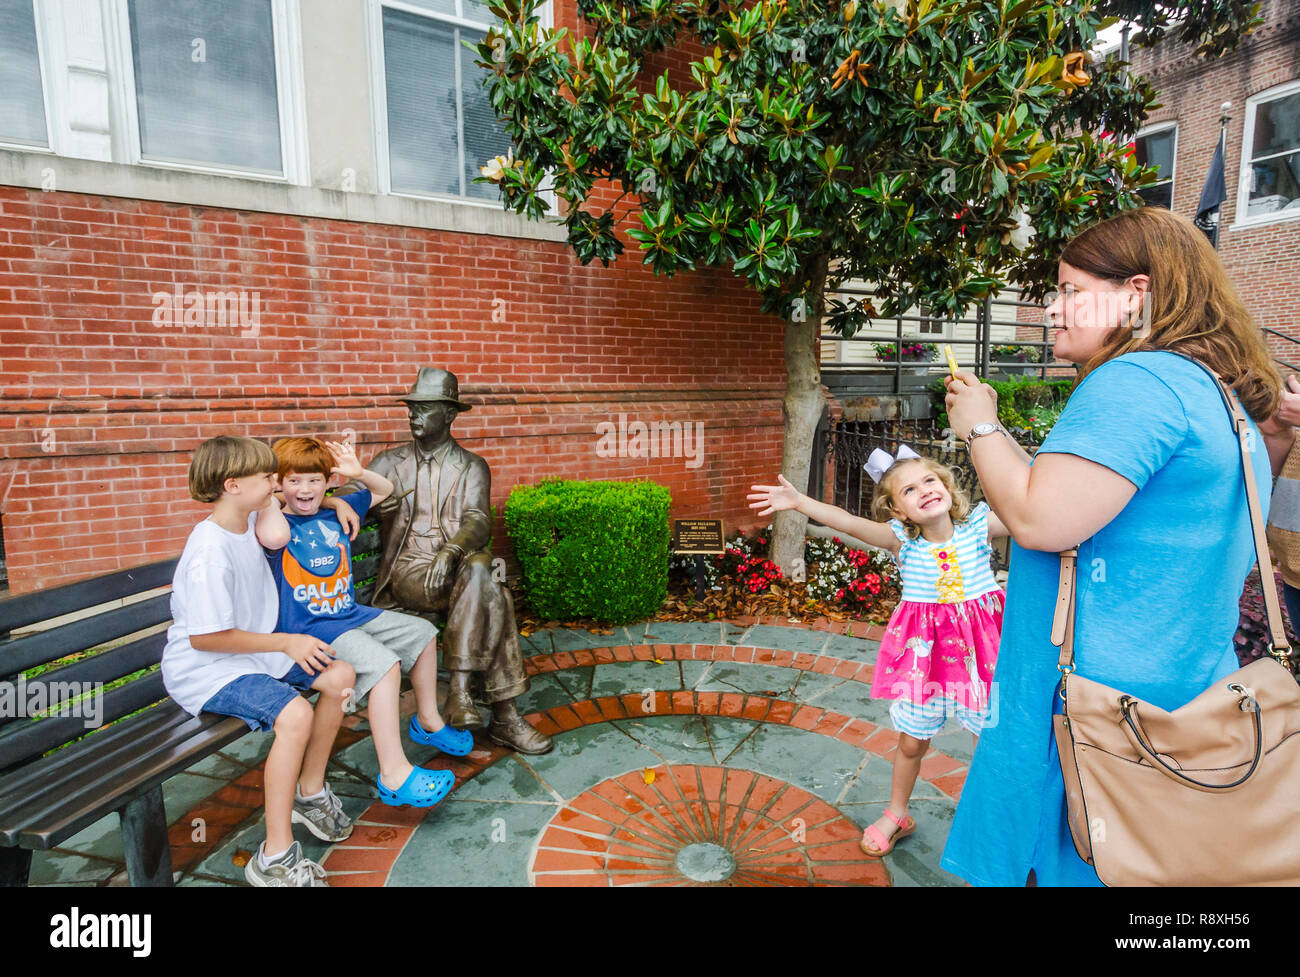 A woman photographs her children with a bronze statue of William Faulkner, May 31, 2015, in Oxford, Mississippi. Stock Photo